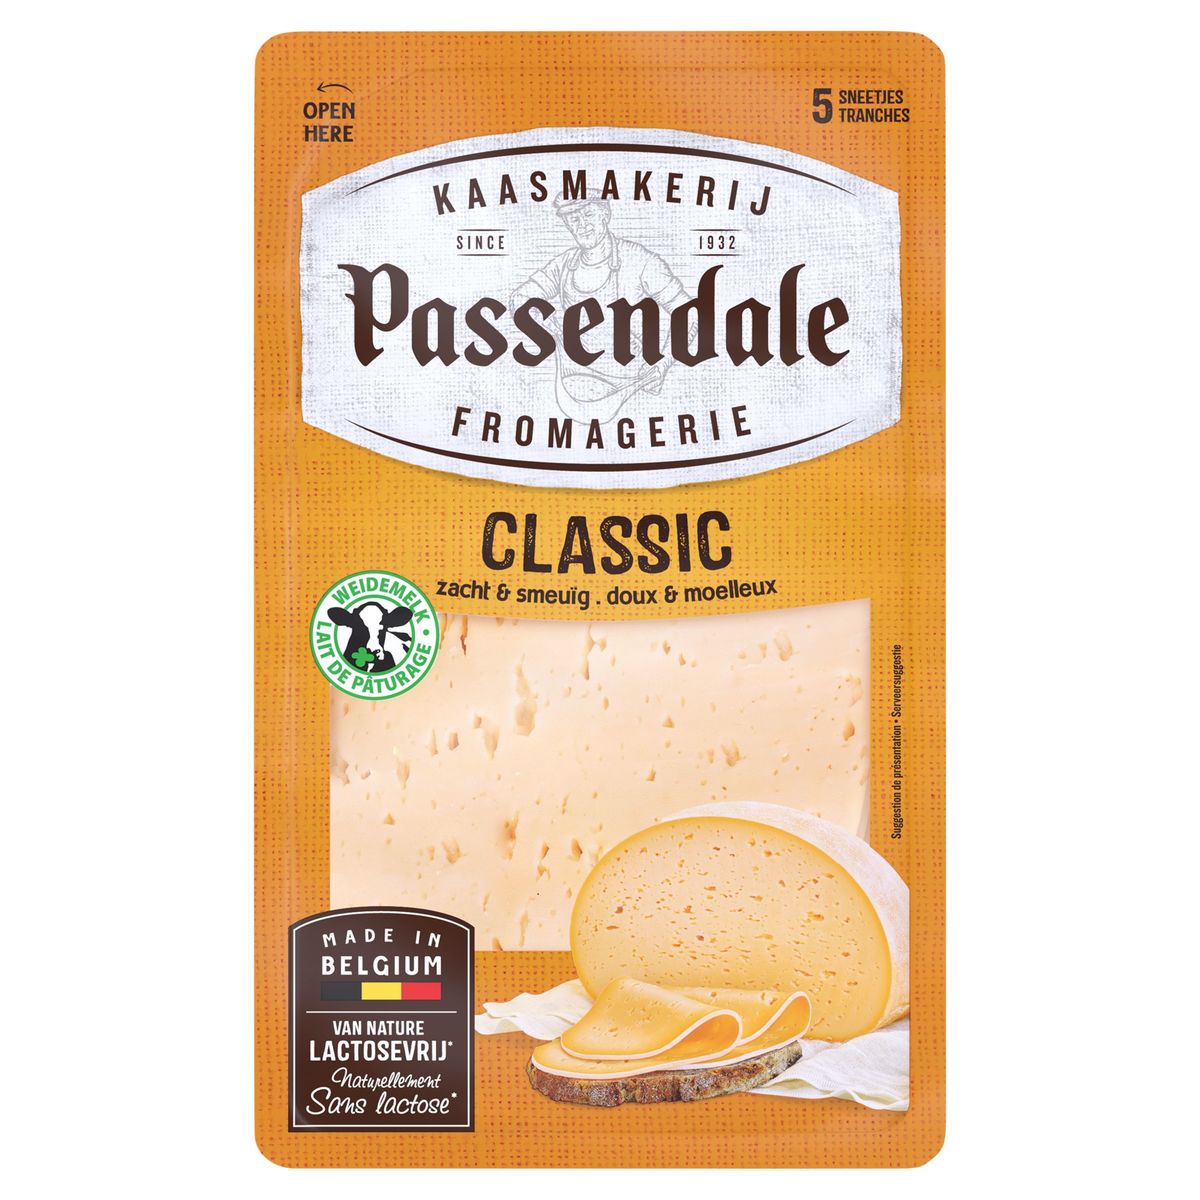 Passendale Classic 5 Tranches 190 g